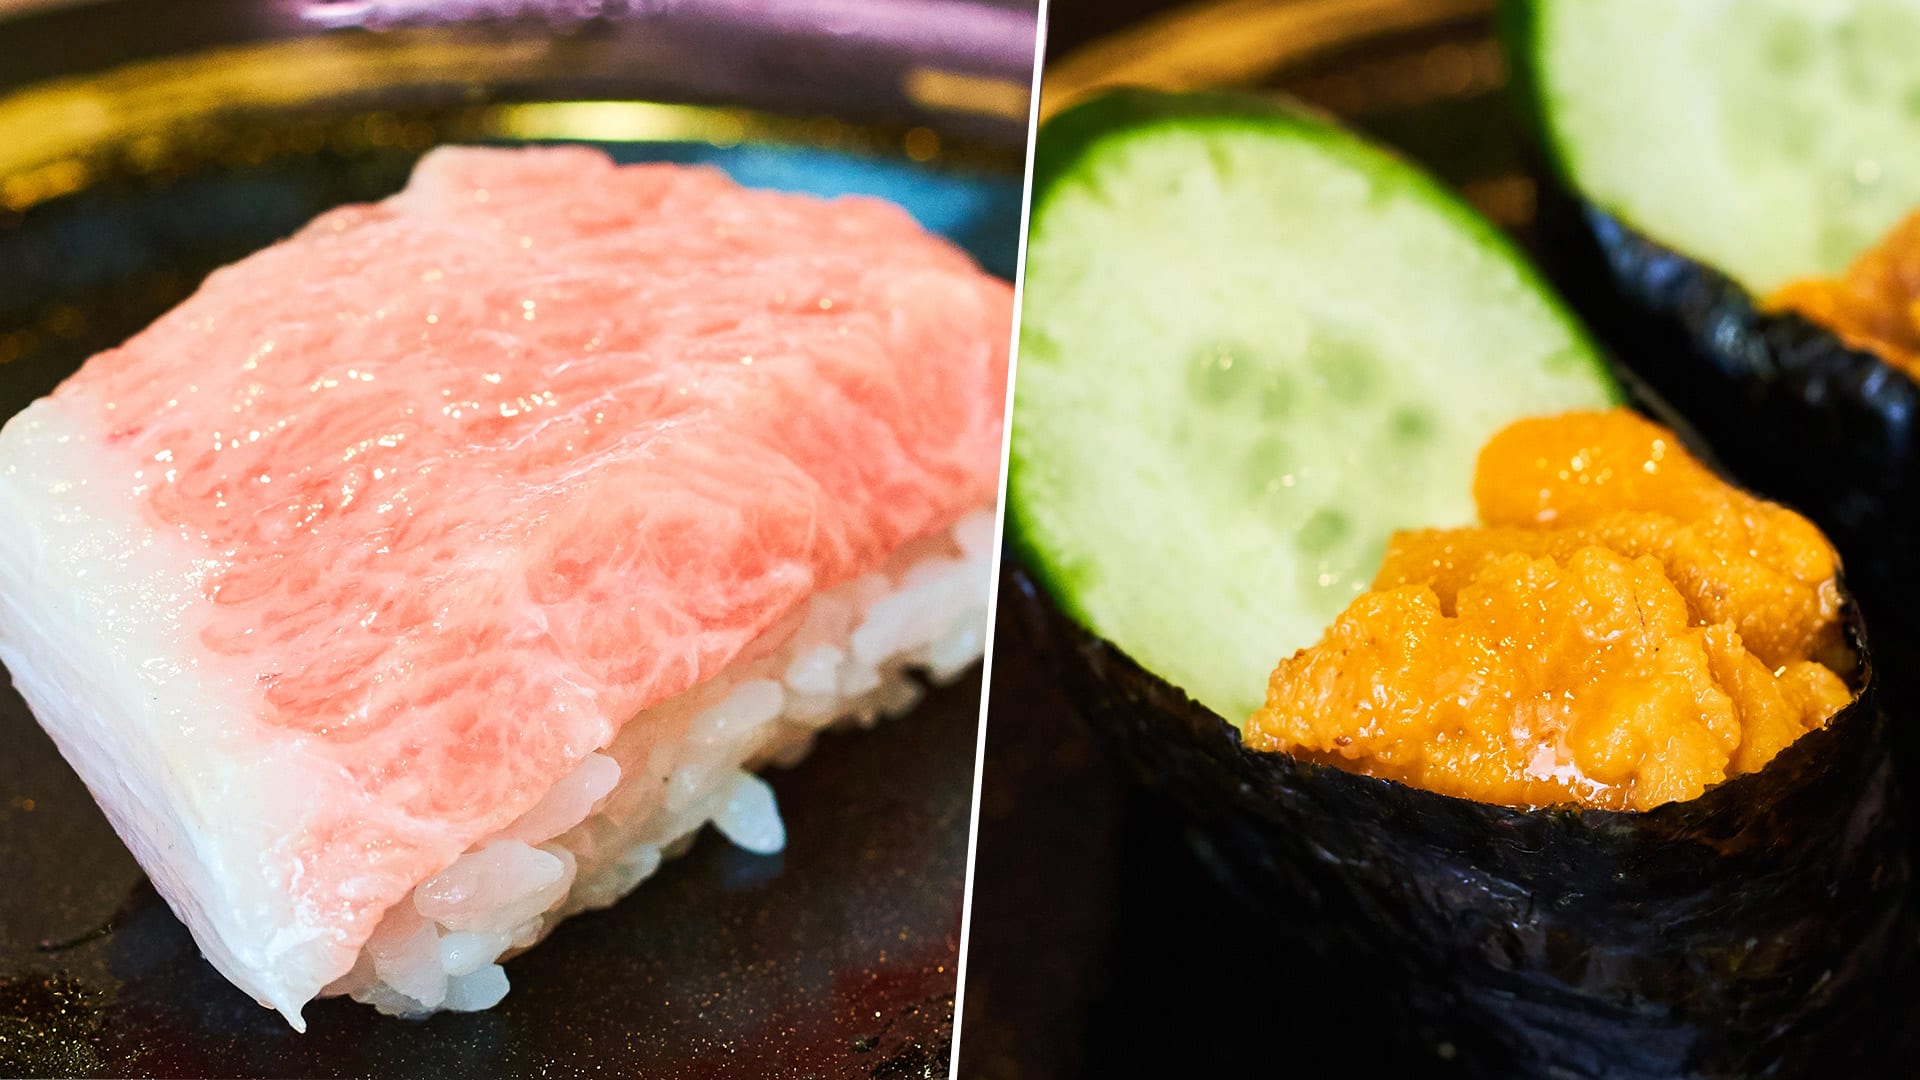 Sushiro S'pore Outlet Offers Premium Sushi Like Otoro & Uni At Super Low Prices For Opening Special